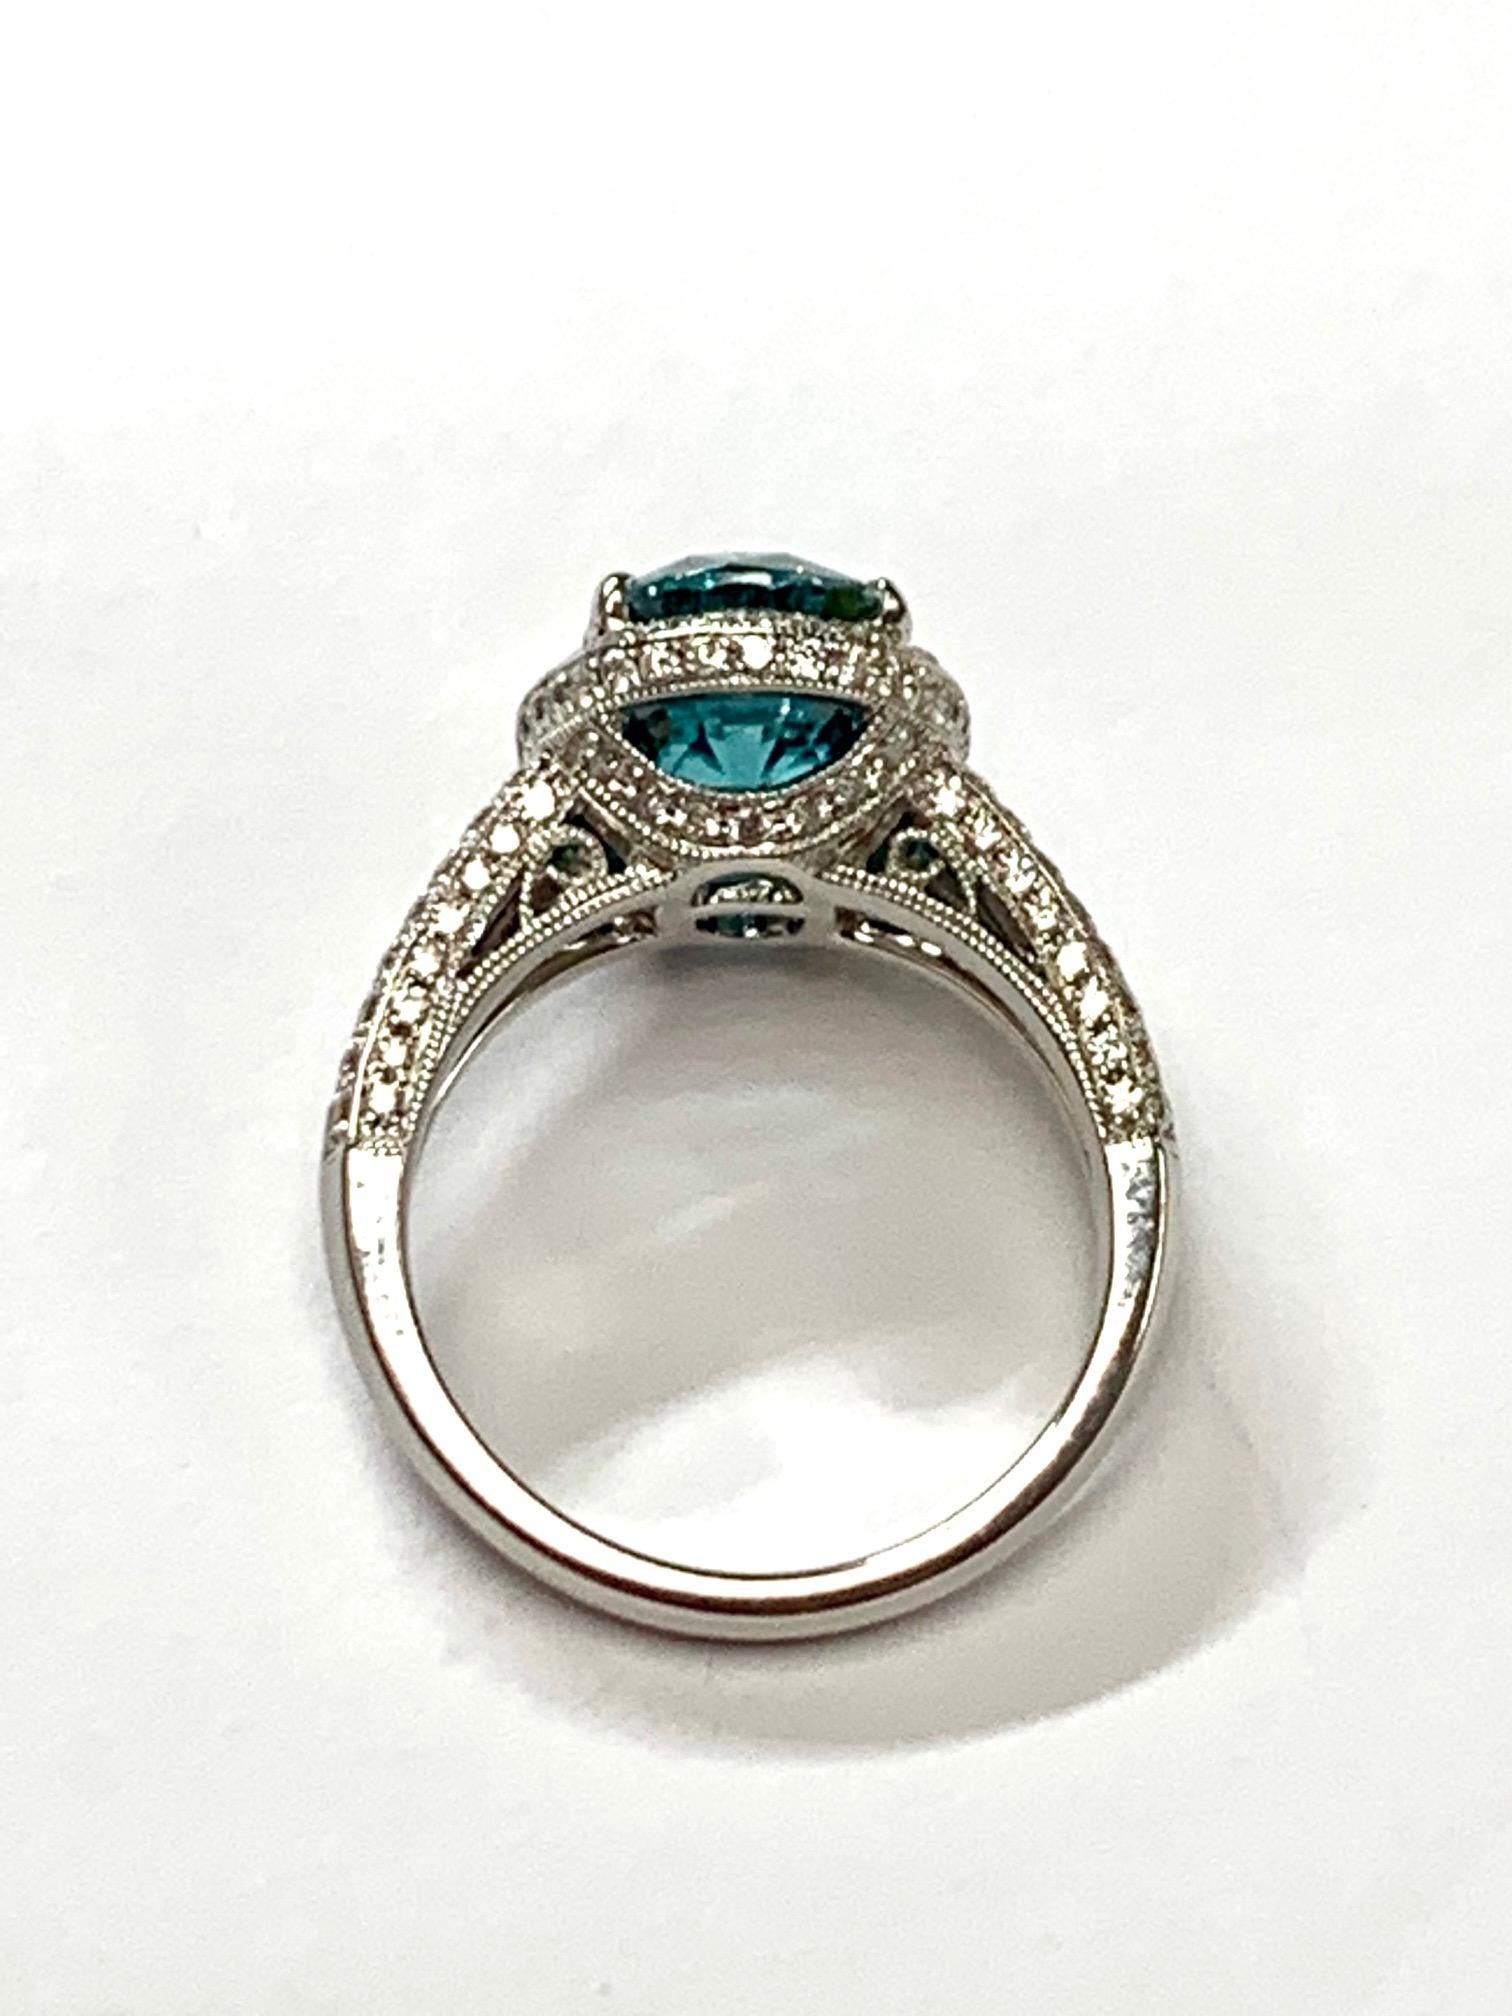 6.07 Carat  Blue Zircon set in 18kw ring surrounded with 1.0 ct pave set diamonds around, in the gallery, half way on the  split shank,and the side of the ring 